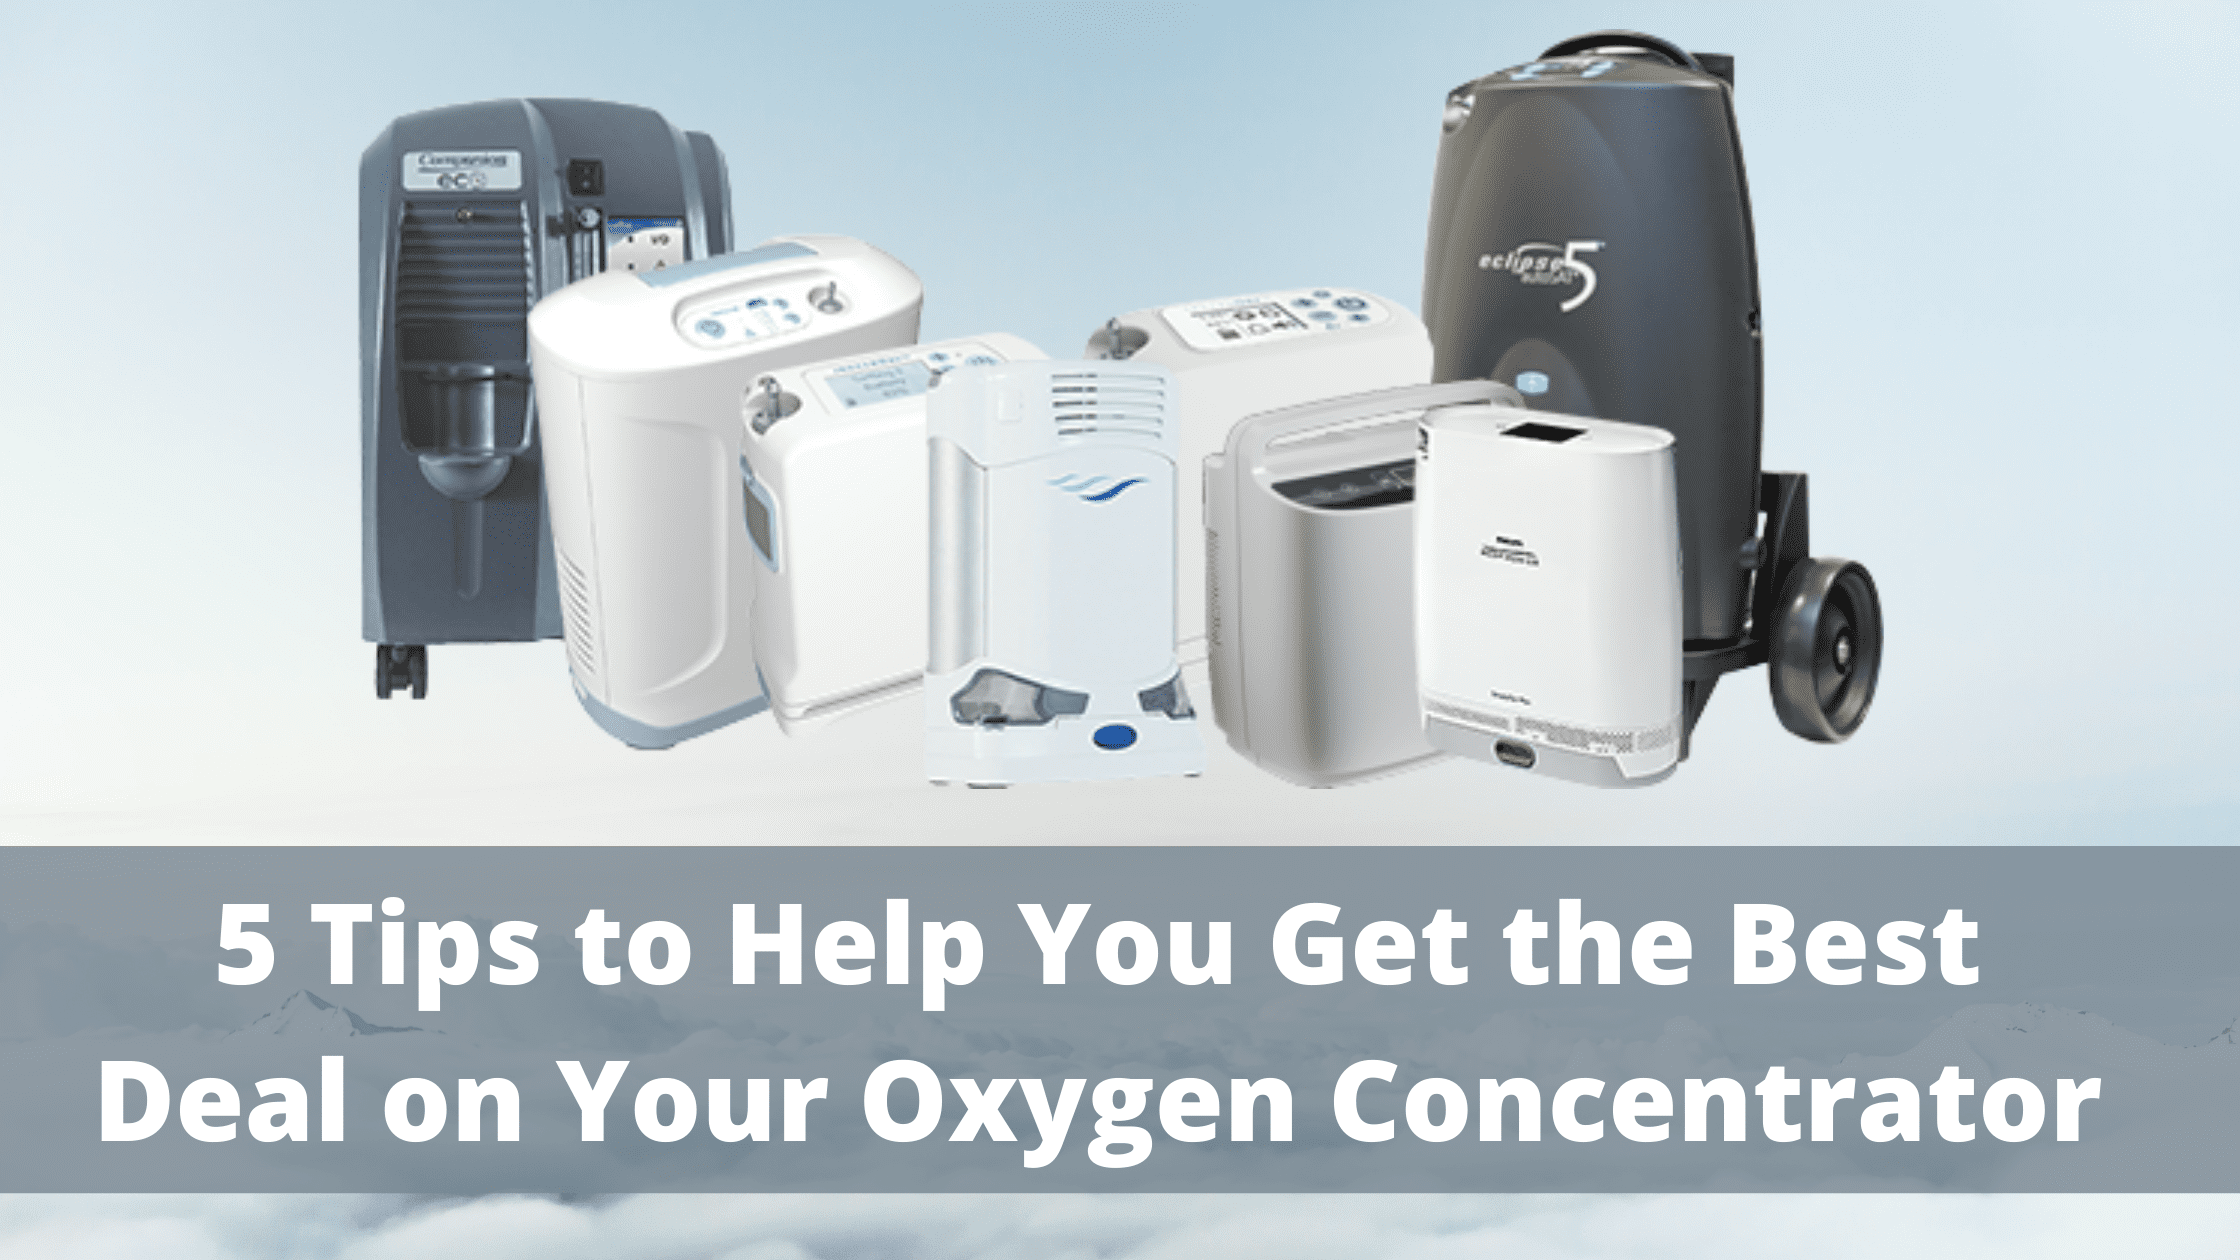 5 Tips to Help You Get the Best Deal on Your Oxygen Concentrator